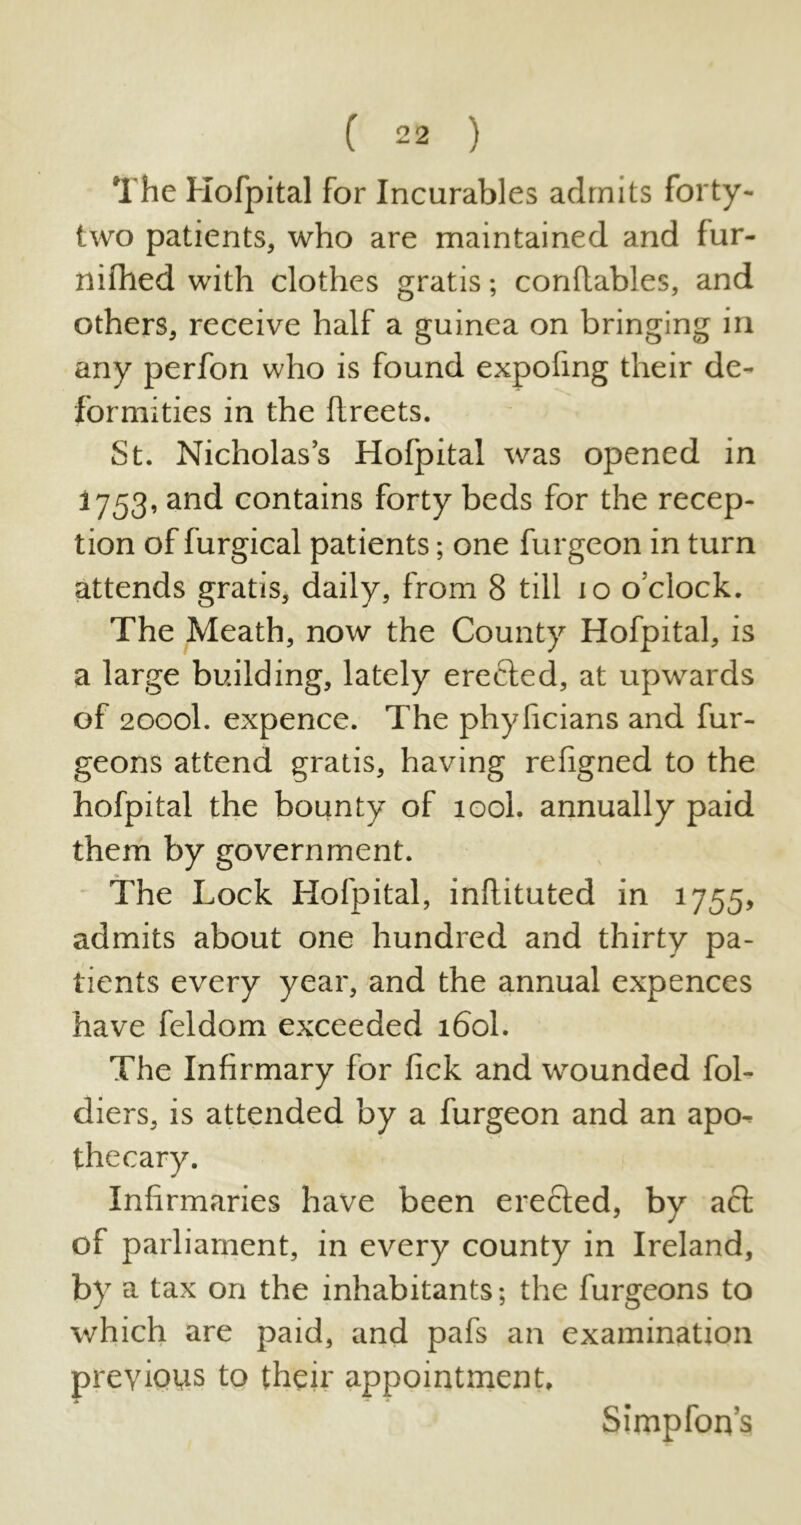 The Hofpital for Incurables admits forty- two patients, who are maintained and lur- nifhed with clothes gratis; conflables, and others, receive half a guinea on bringing in any perfon who is found expofing their de- formities in the ftreets. St. Nicholas’s Hofpital was opened in 1753, and contains forty beds for the recep- tion of furgical patients; one furgeon in turn attends gratis, daily, from 8 till 10 o’clock. The Meath, now the County Hofpital, is a large building, lately erected, at upwards of 2000I. expence. The phylicians and fur- geons attend gratis, having refigned to the hofpital the bounty of 100I. annually paid them by government. The Lock Hofpital, inflituted in 1755, admits about one hundred and thirty pa- tients every year, and the annual expences have feldom exceeded 160I. The Infirmary for lick and wounded fol- diers, is attended by a furgeon and an apo- thecary. Infirmaries have been erected, by act of parliament, in every county in Ireland, by a tax on the inhabitants; the furgeons to which are paid, and pafs an examination previous to their appointment. Simpfon’s